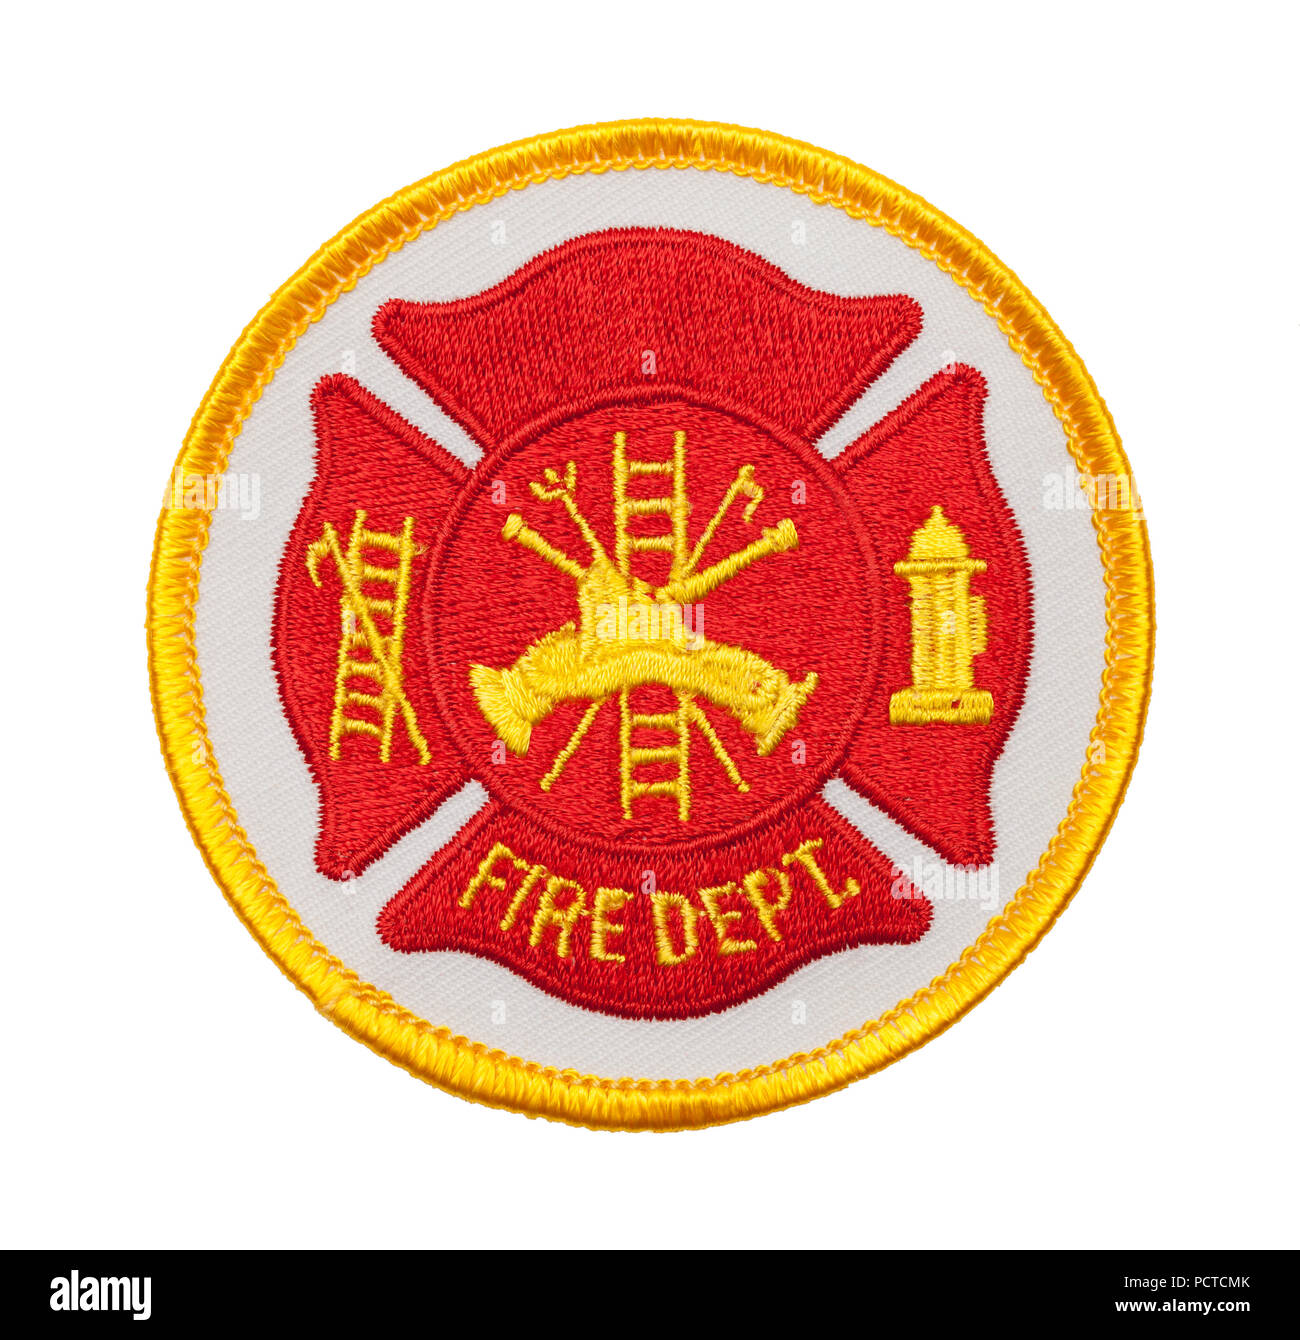 Circle Fire Department Patch Isolated on a White Background. Stock Photo